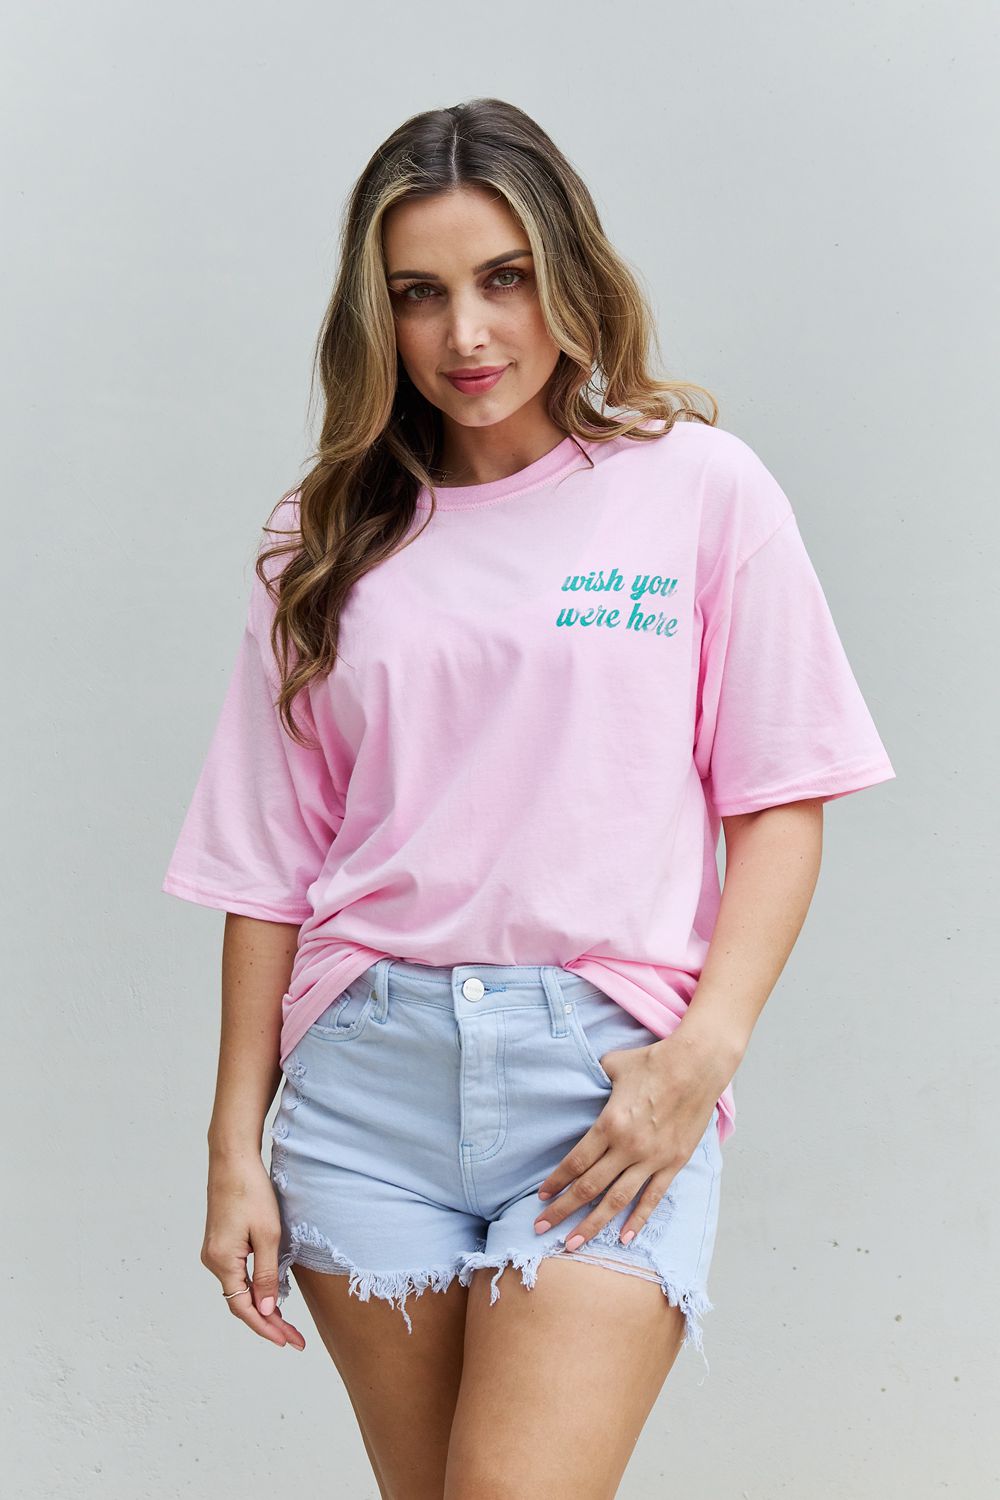 Jerry's Apparel Graphic T-shirts Blush Pink / S/M "Wish You Were Here" Oversized Graphic T-Shirt